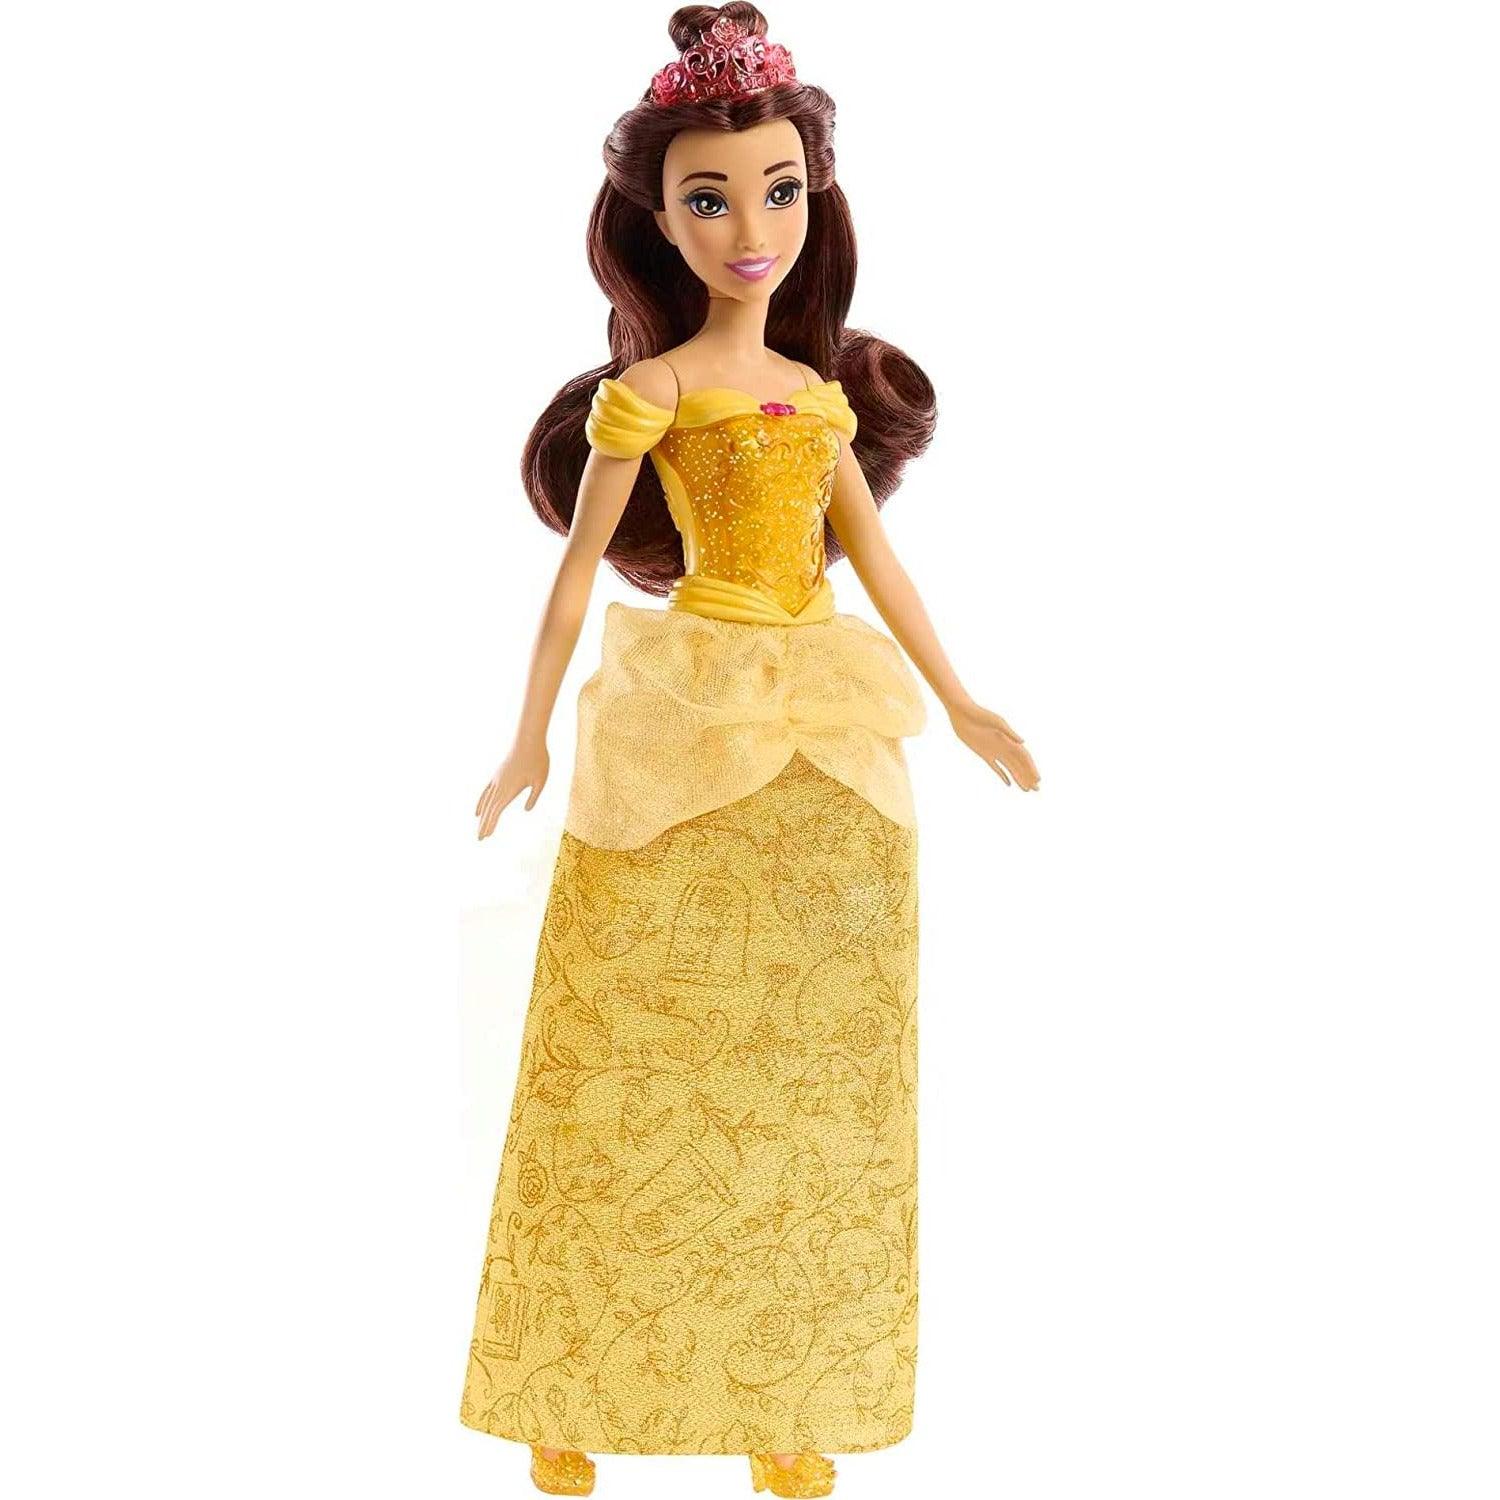 Disney Princess Dolls, New for 2023, Belle Posable Fashion Doll with Sparkling Clothing and Accessories, Disney Movie Toys - BumbleToys - 5-7 Years, Disney Princess, Fashion Dolls & Accessories, Girls, Pre-Order